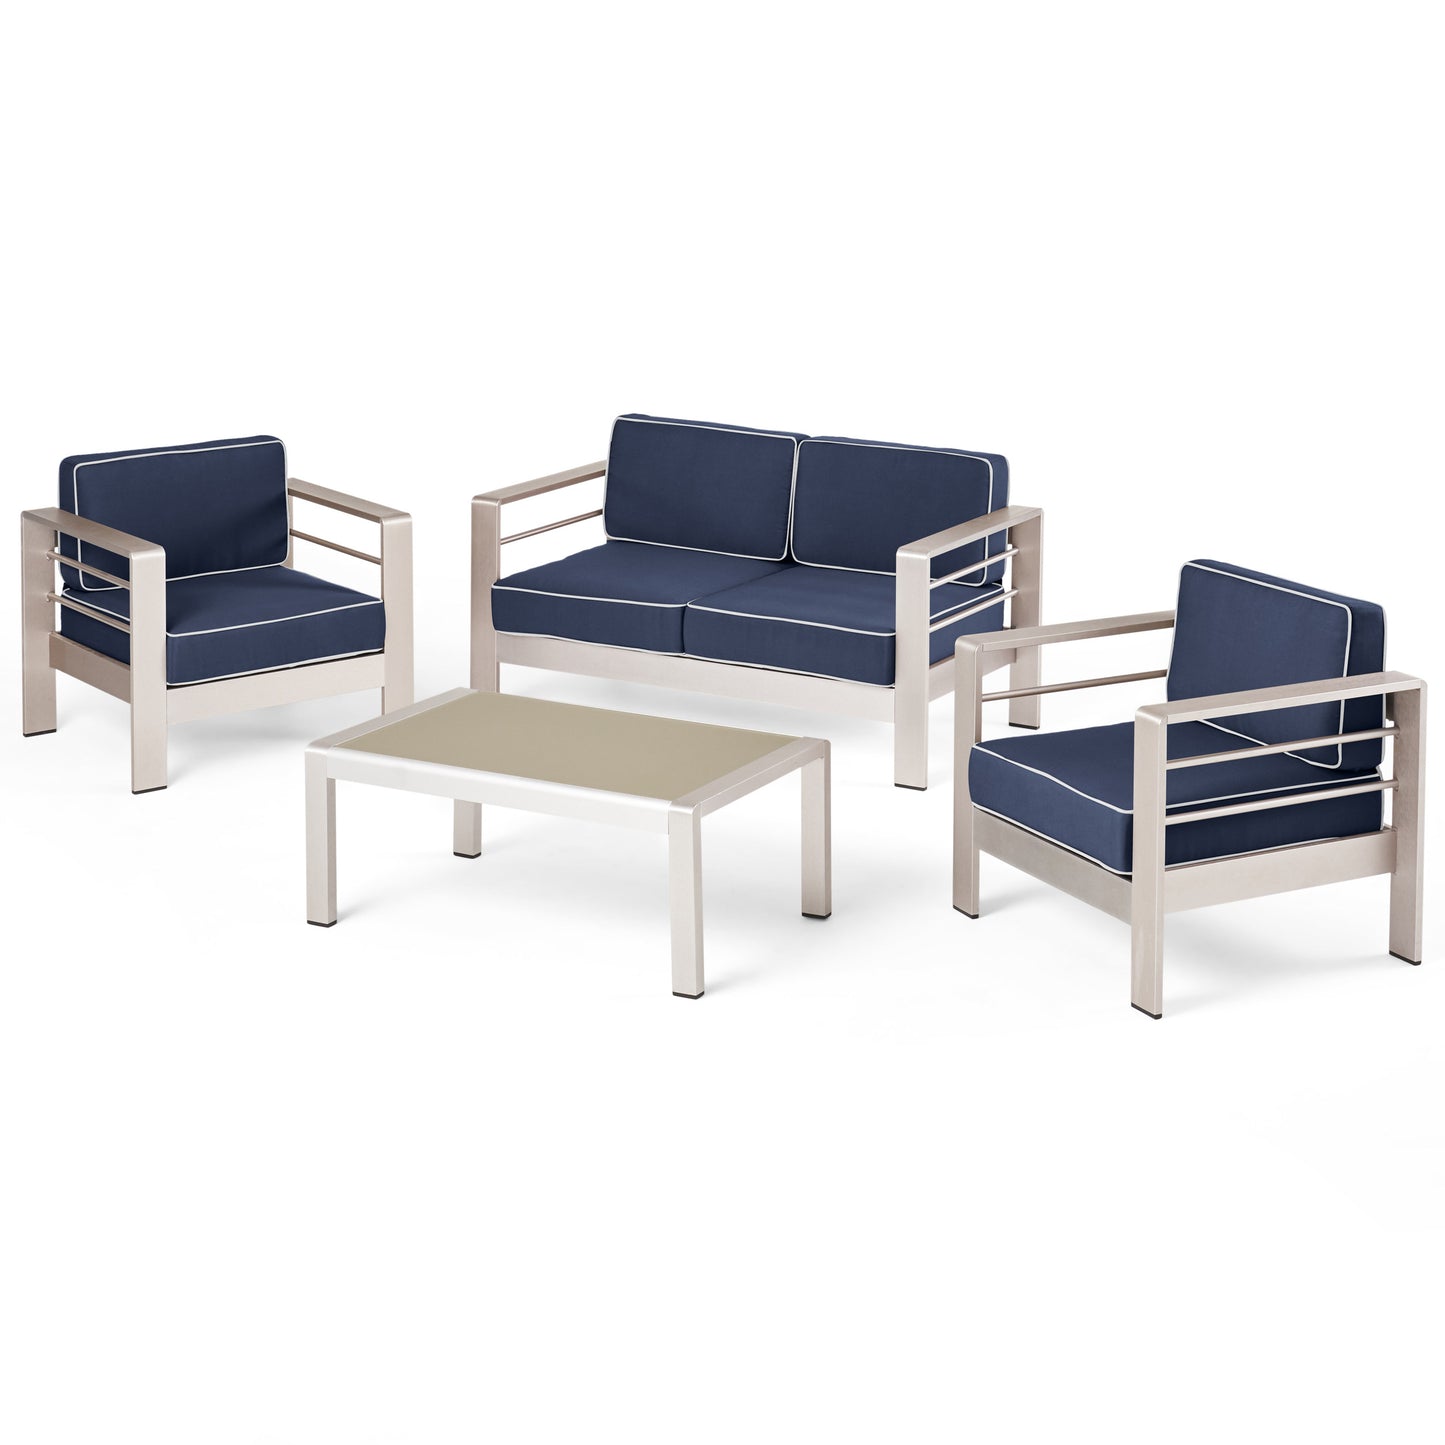 Crested Bay Outdoor Aluminum 4 Piece Chat Set with Sunbrella Cushions